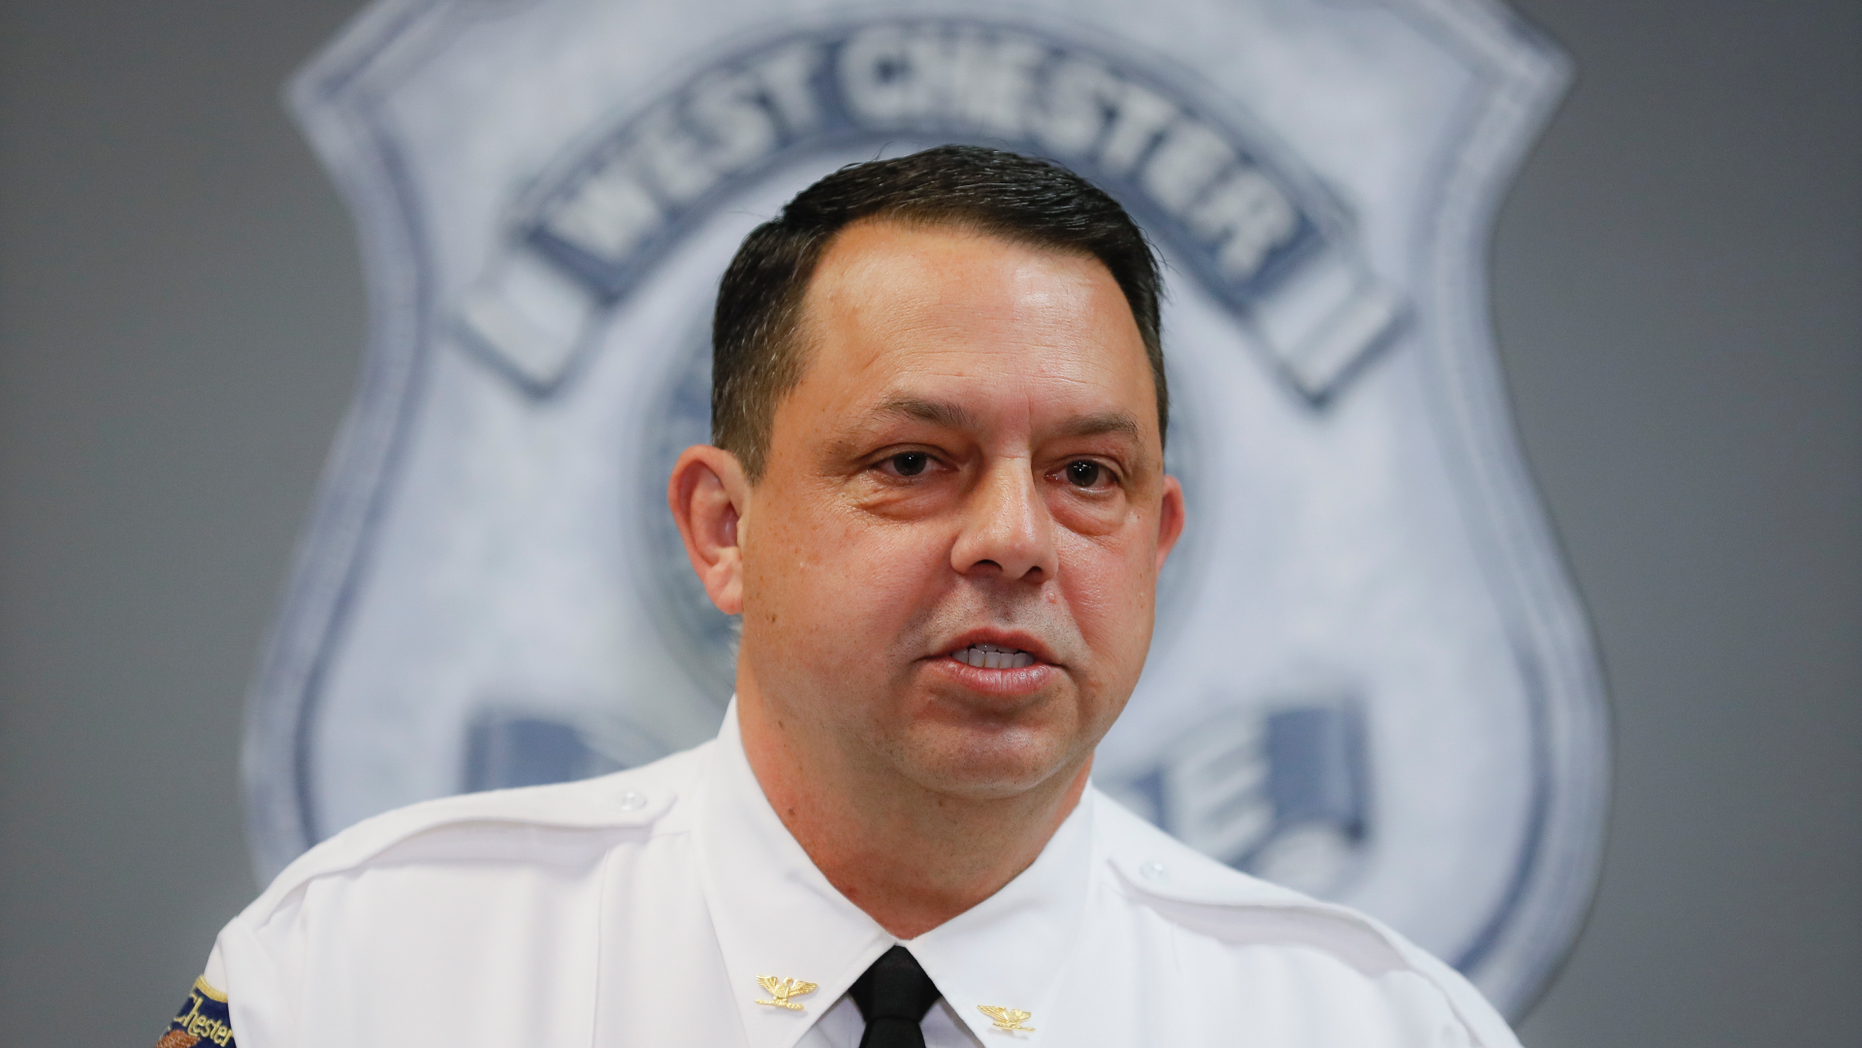 West Chester Chief of Police Joel Herzog speaks to reporters during a news conference, Monday, April 29, 2019, in West Chester, Ohio. Multiple people were found dead at an apartment complex in Ohio after a man called 911 saying he had returned home to find his wife and family members on the ground and bleeding. Herzog said that police were searching the area for any suspect, and there was no immediate threat to the community. (AP Photo/John Minchillo)